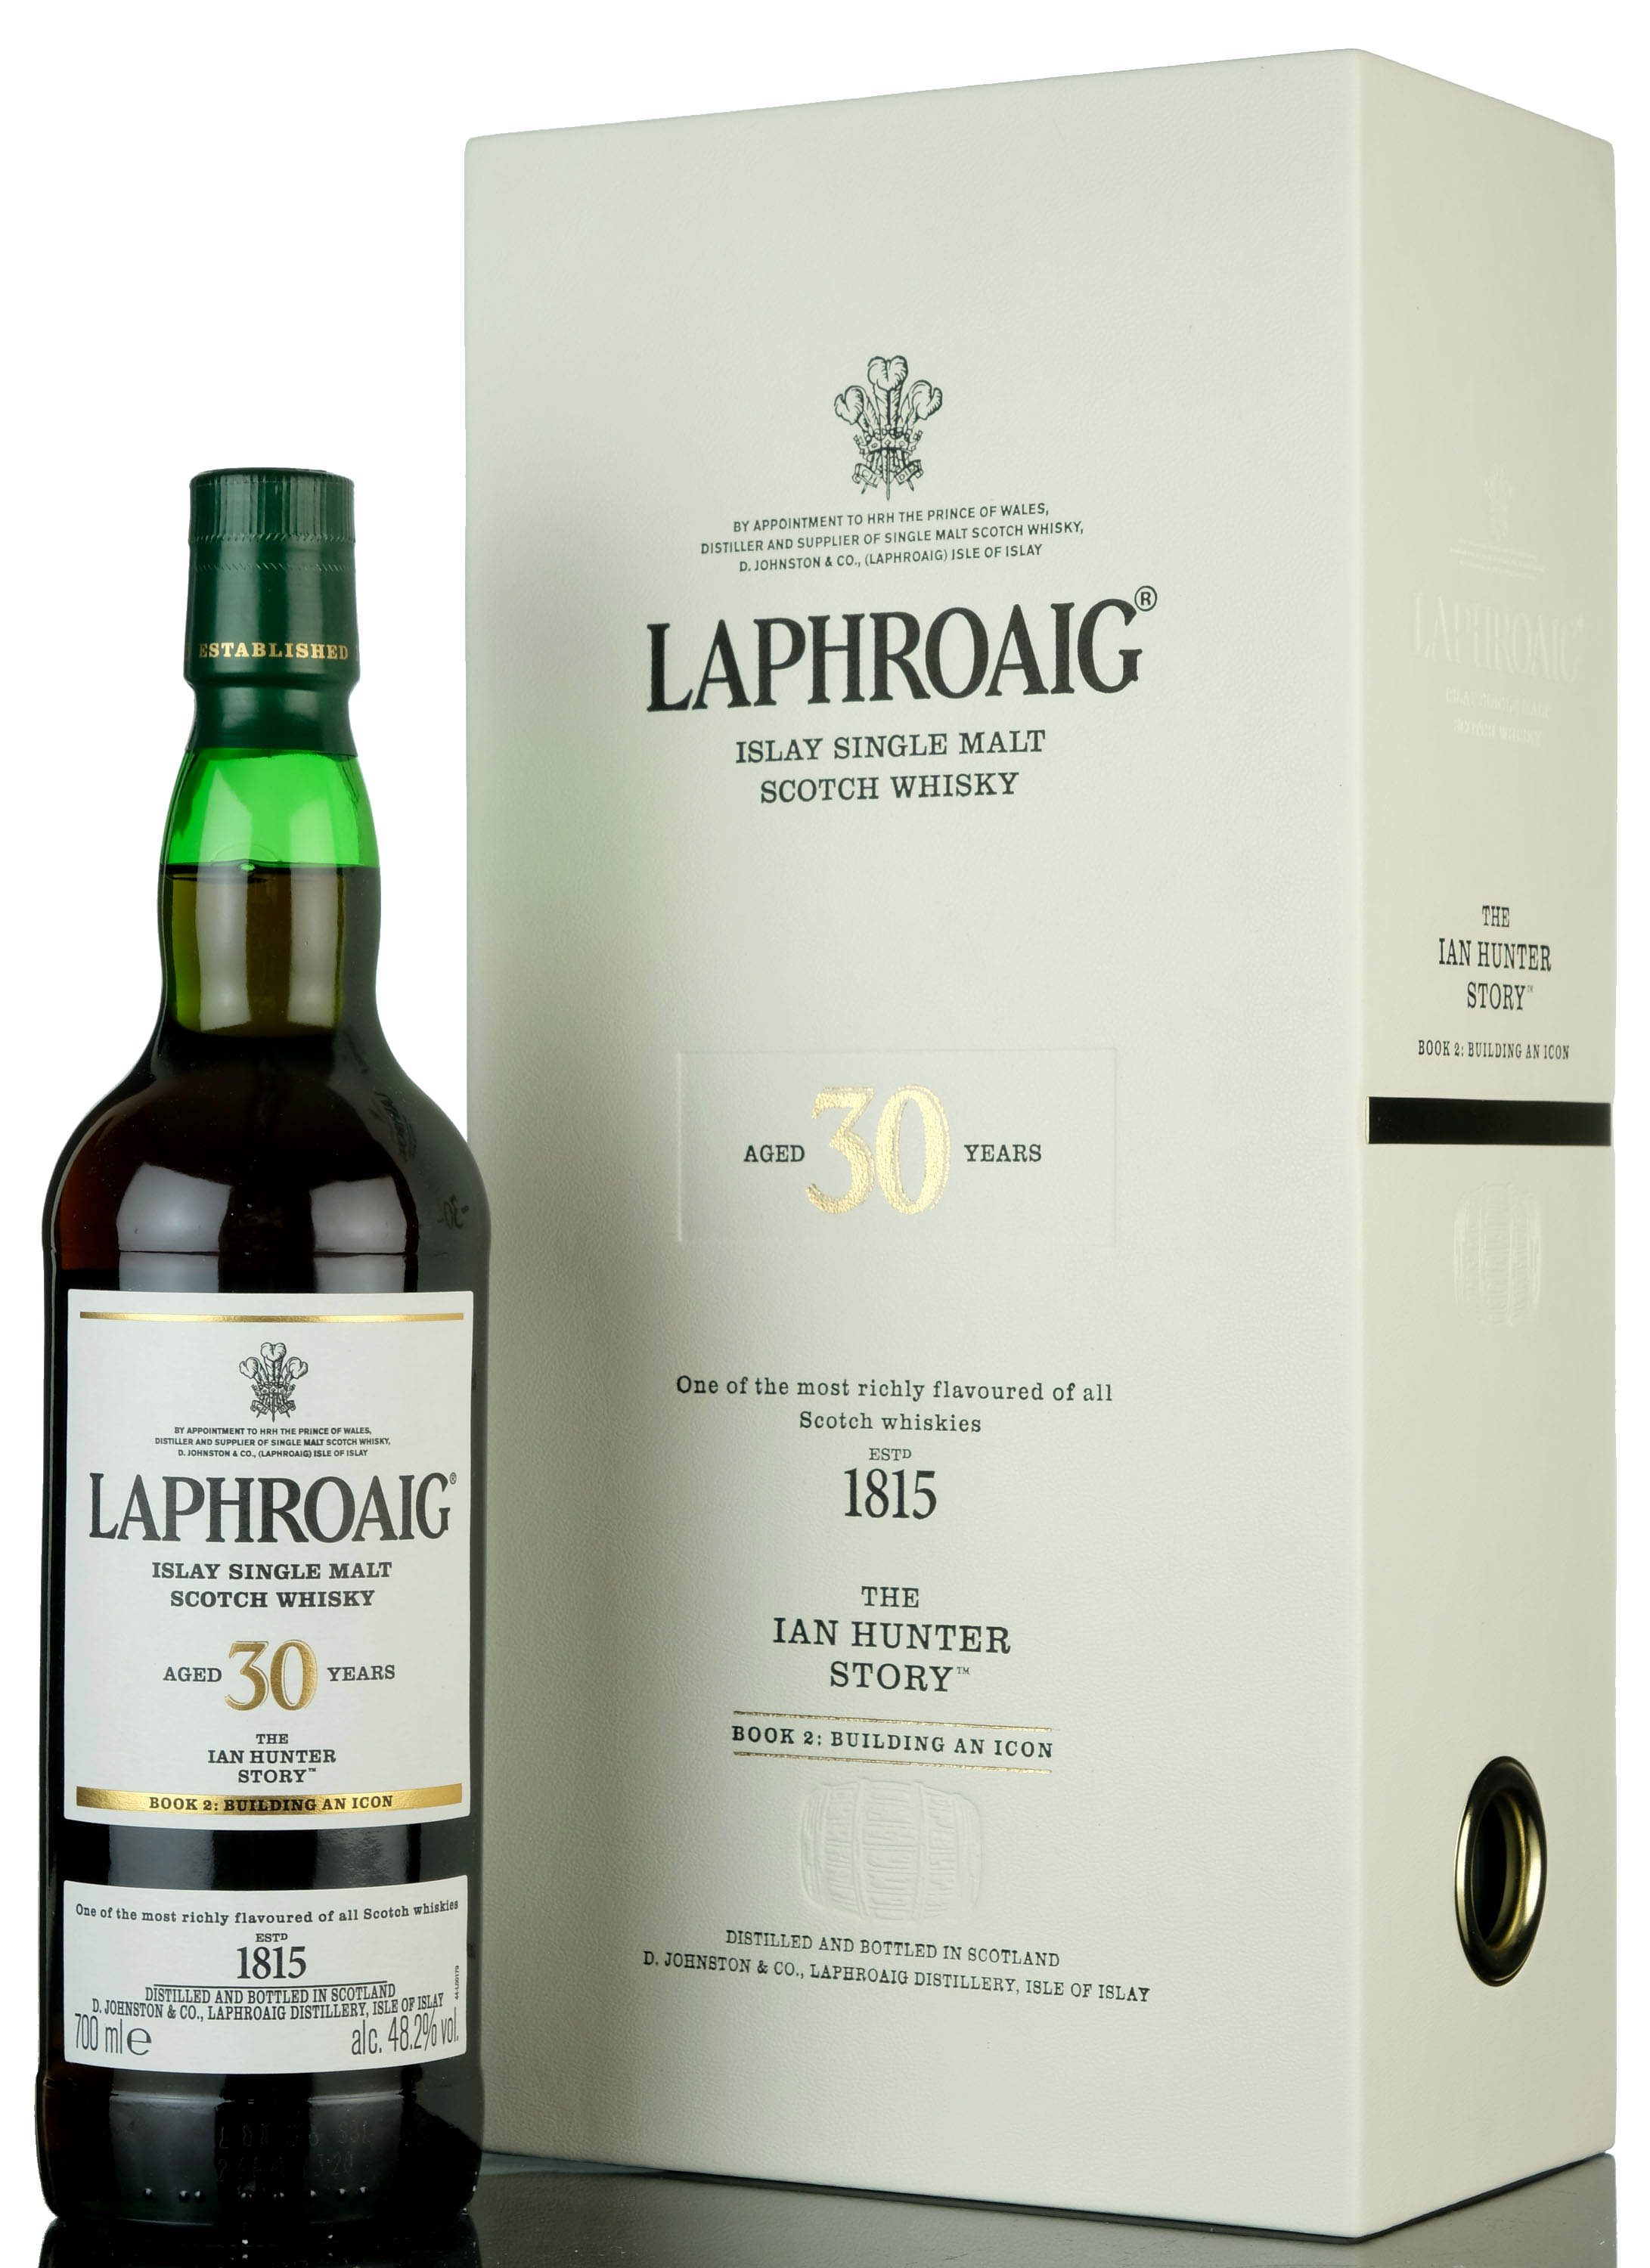 Laphroaig 30 Year Old - The Ian Hunter Story Book 2 - 2020 Release